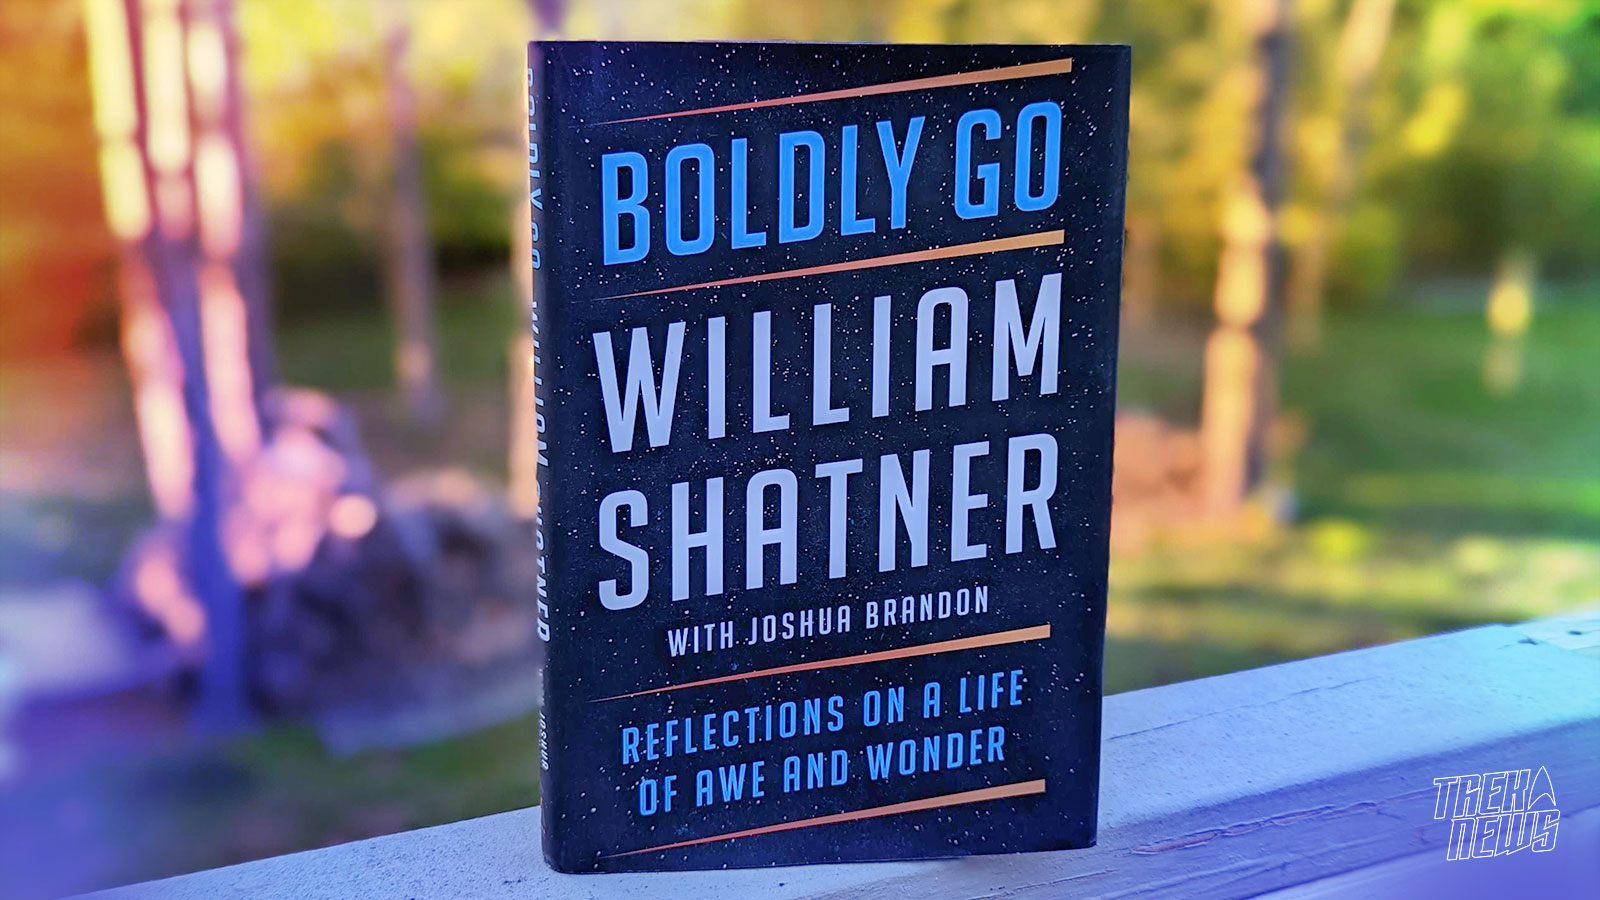 William Shatner’s New Book ‘Boldly Go: Reflections on a Life of Awe and Wonder’ Review: More of a good thing